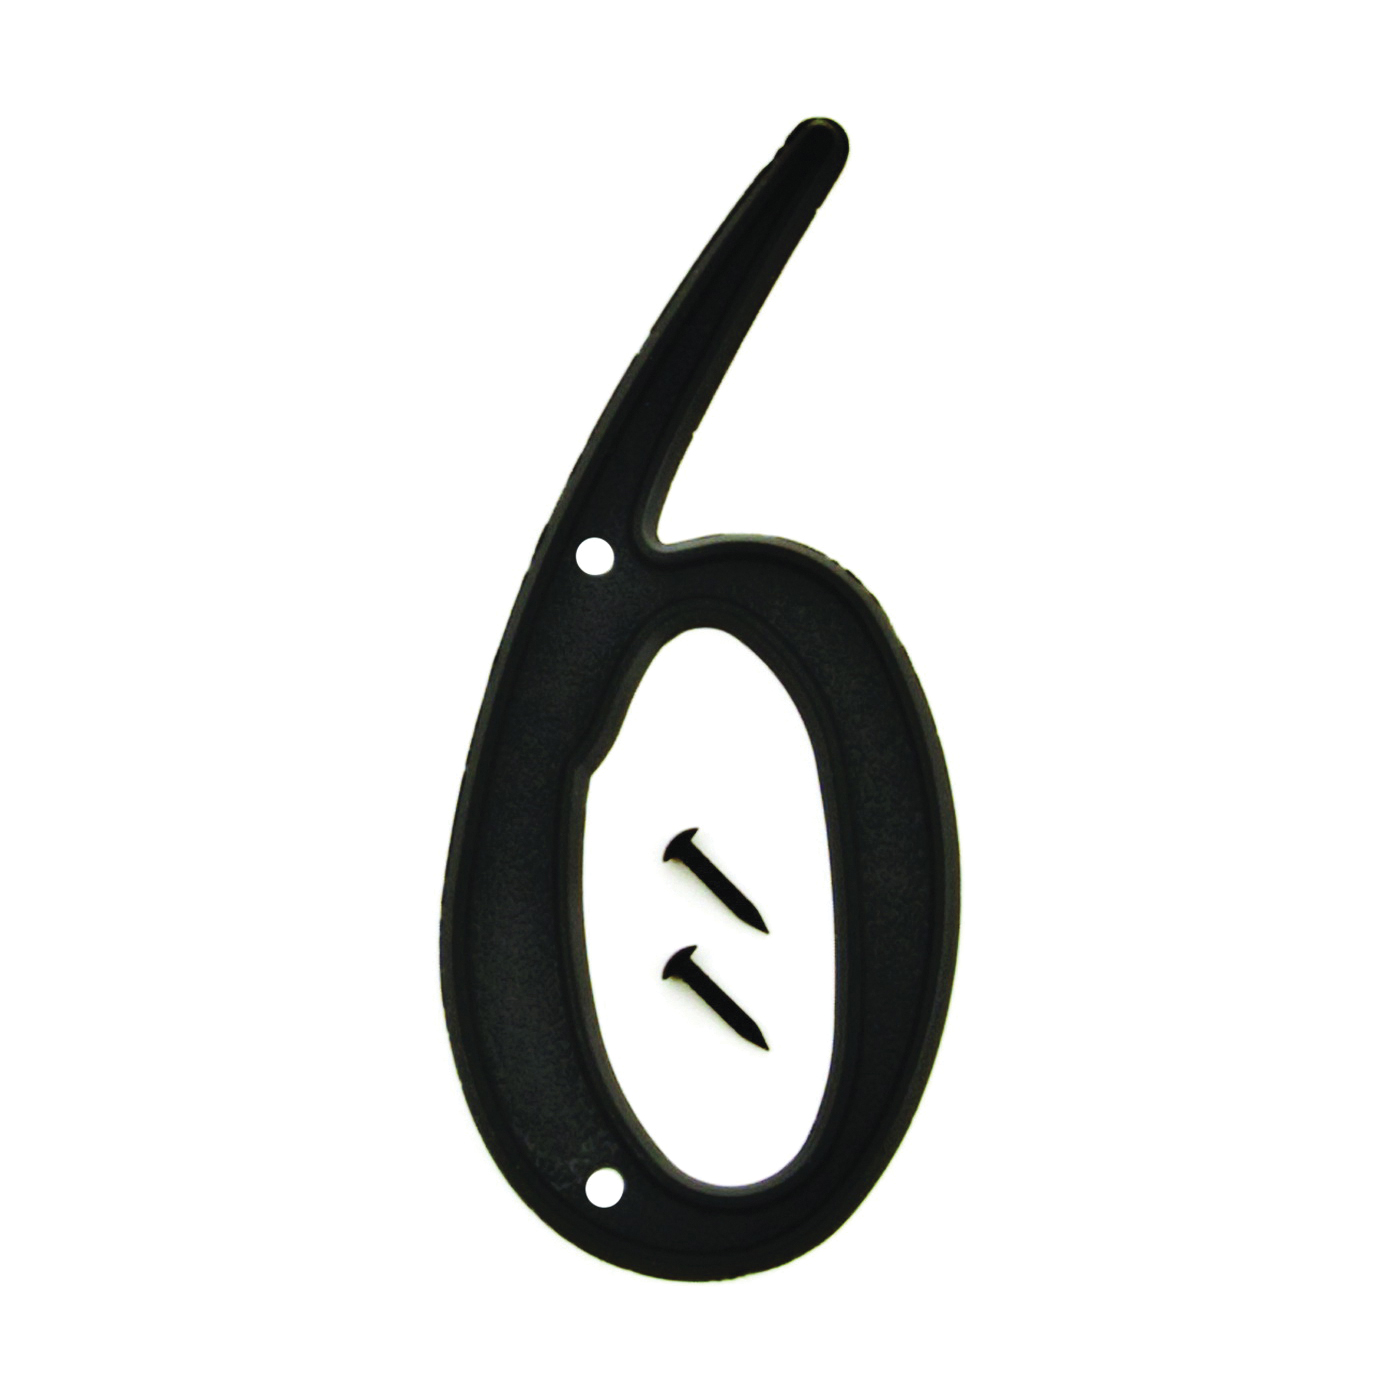 PN-29/6 House Number, Character: 6, 4 in H Character, Black Character, Plastic